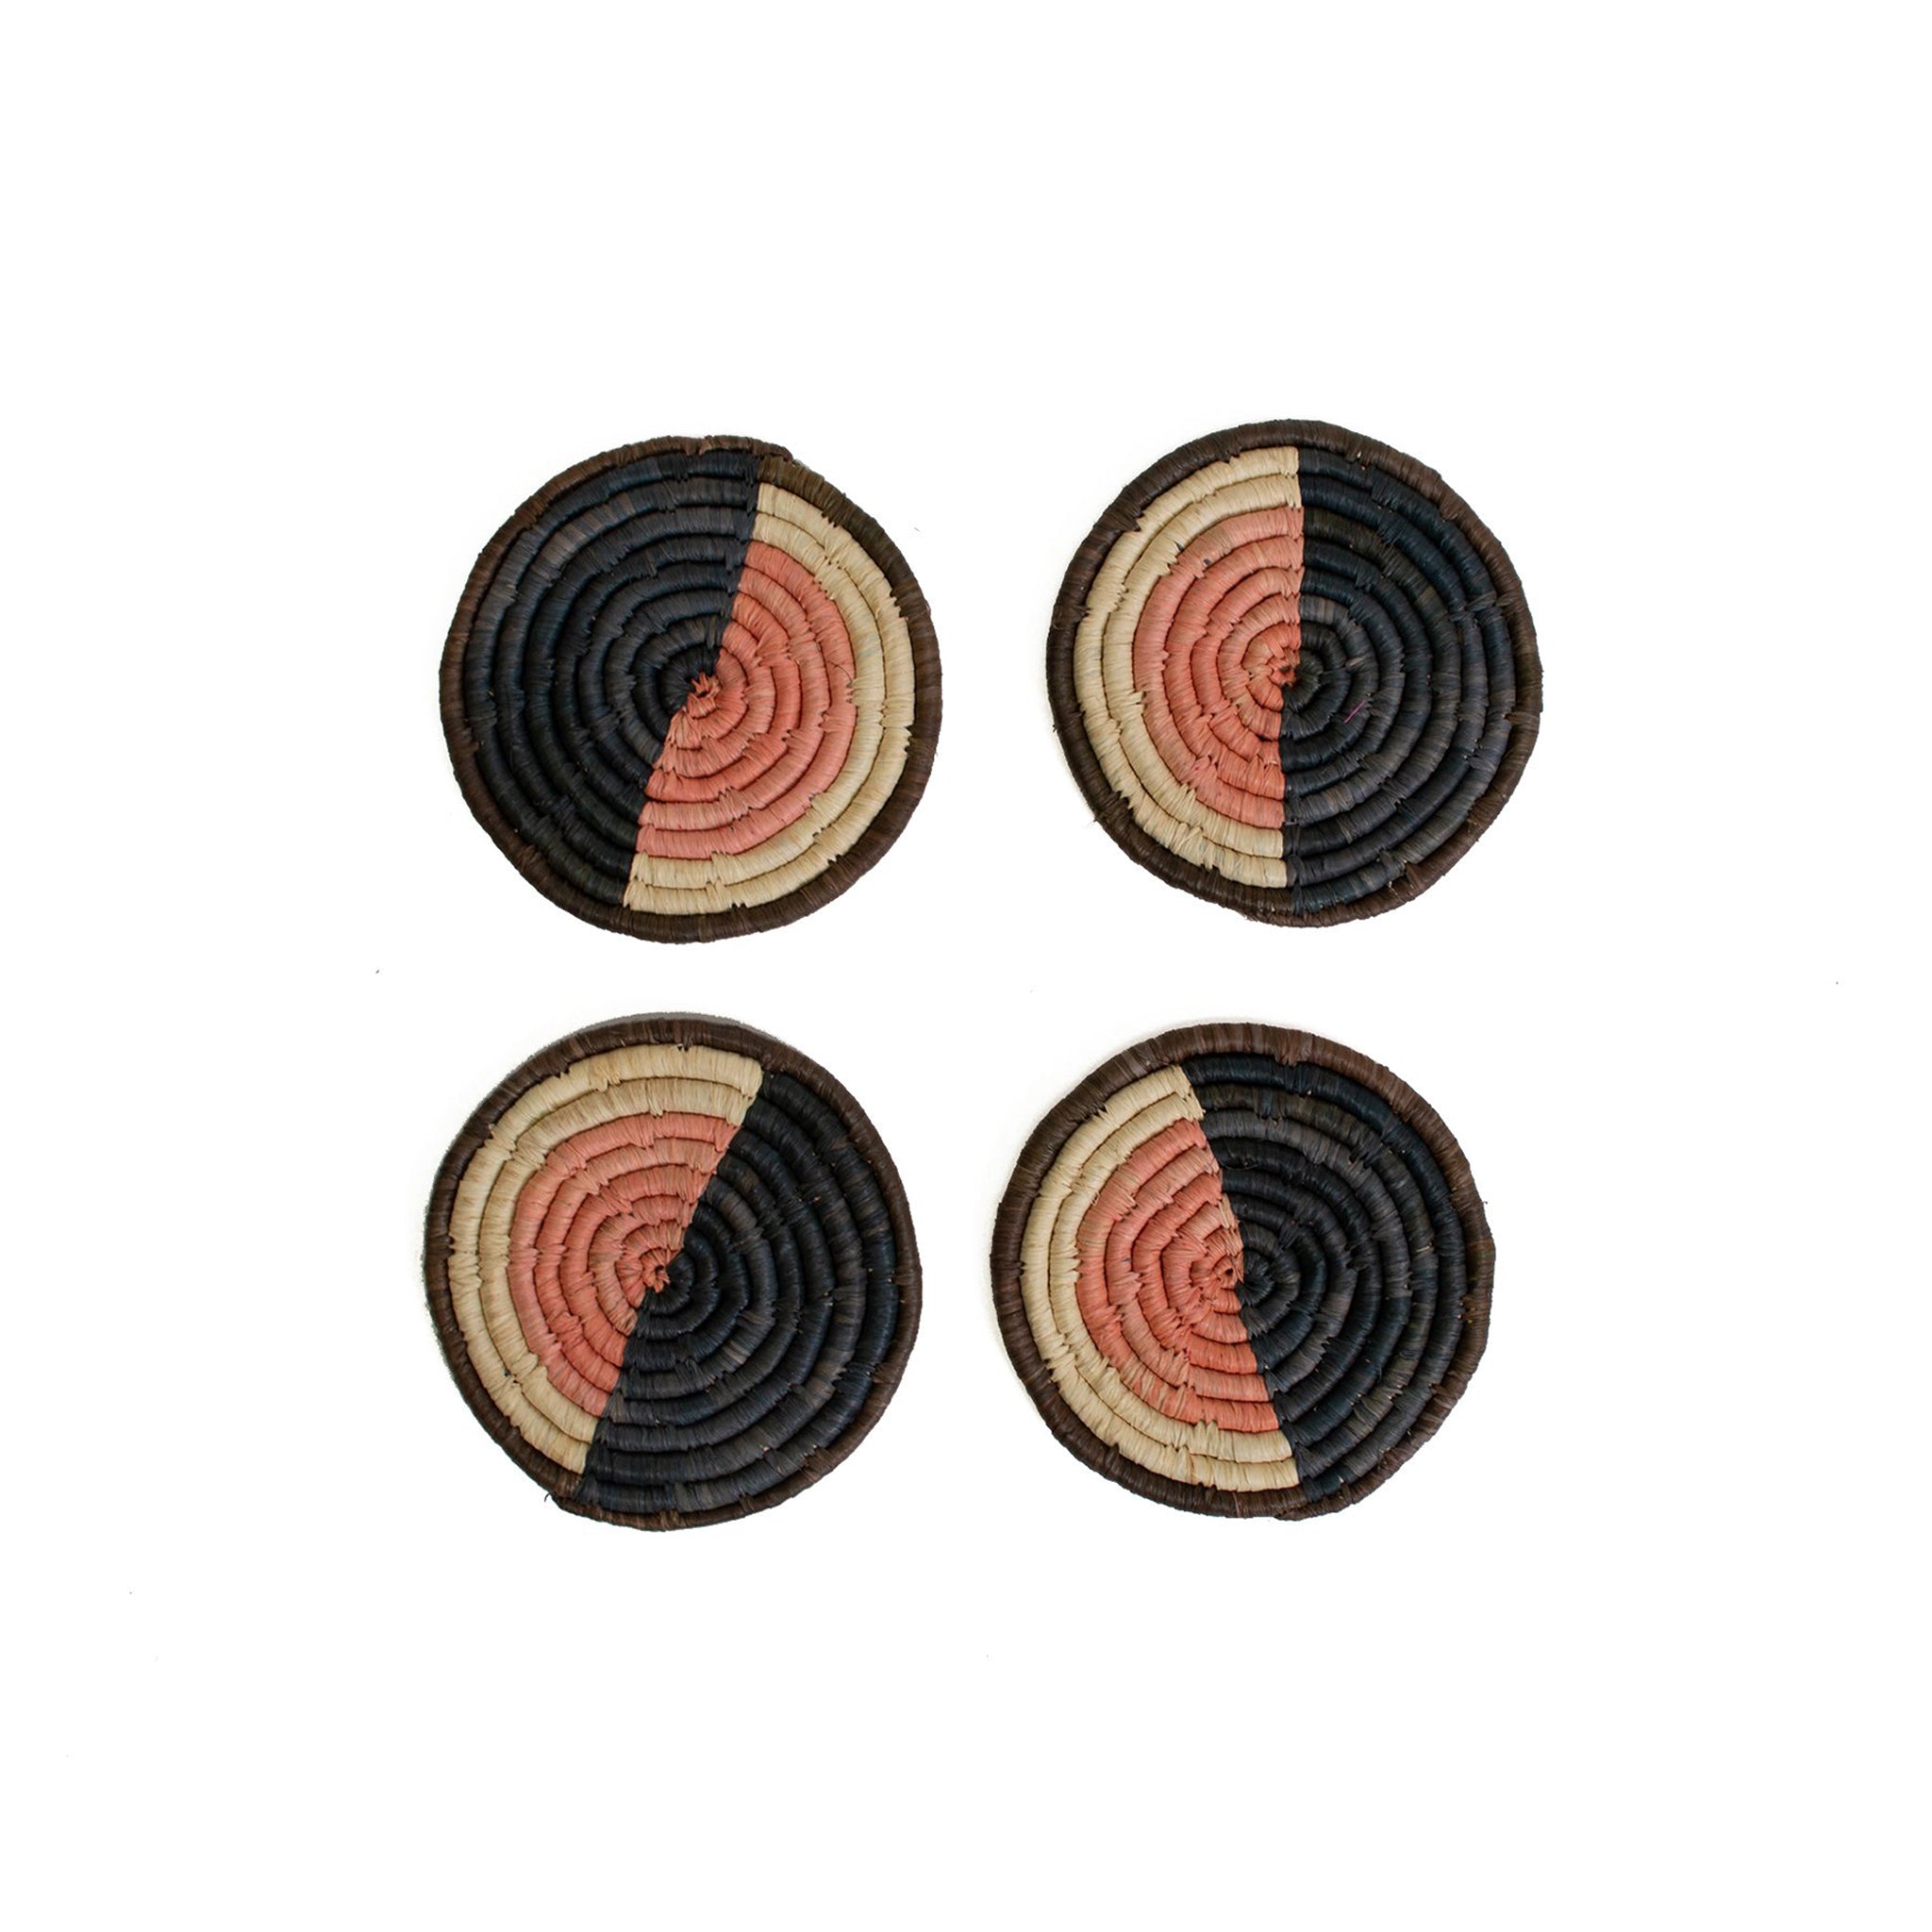 Miró Woven Coasters in Coral and Cocoa, Set of 4